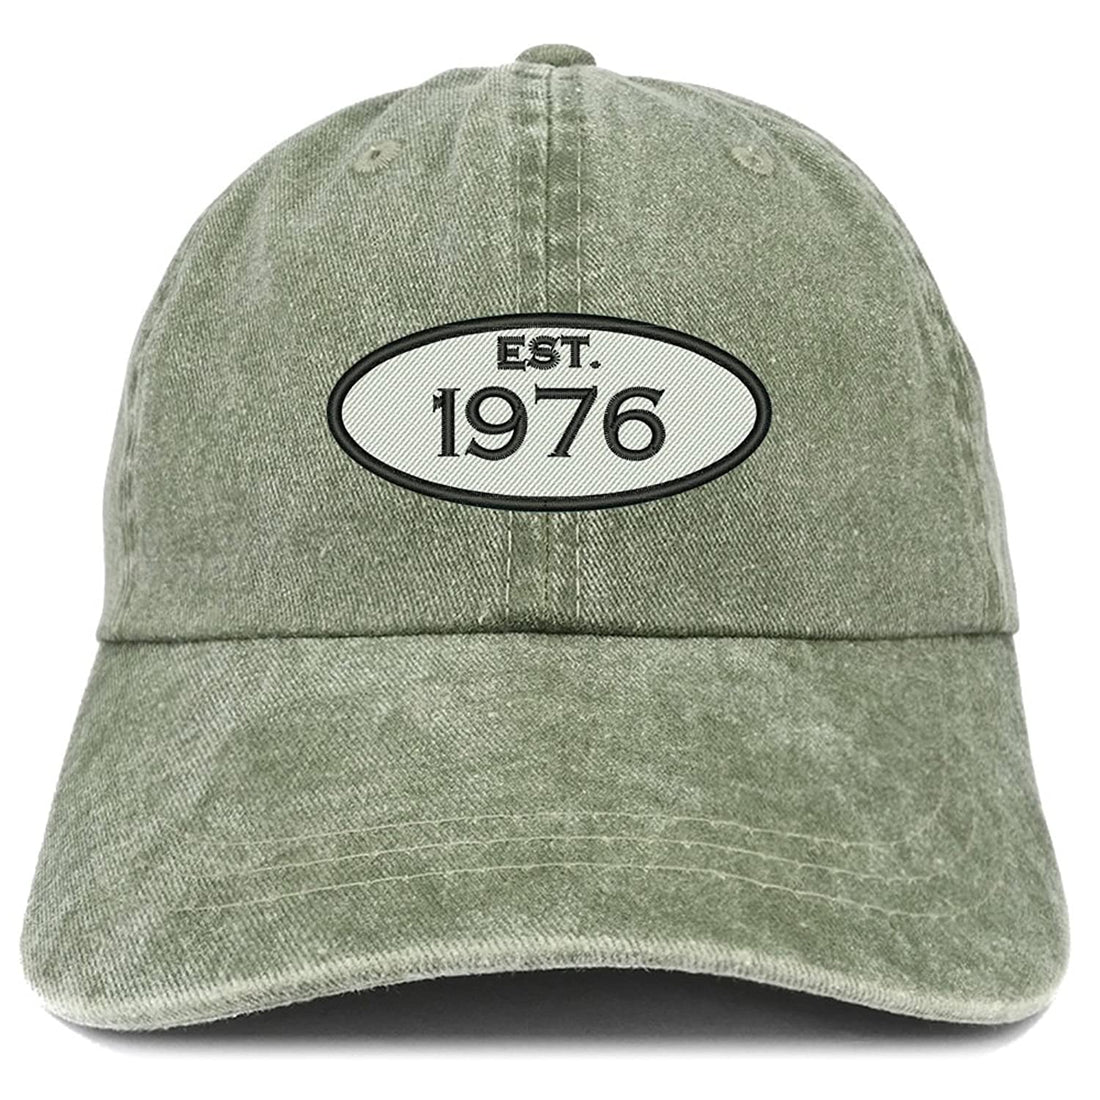 Trendy Apparel Shop Established 1976 Embroidered 42nd Birthday Gift Pigment Dyed Washed Cotton Cap - Olive